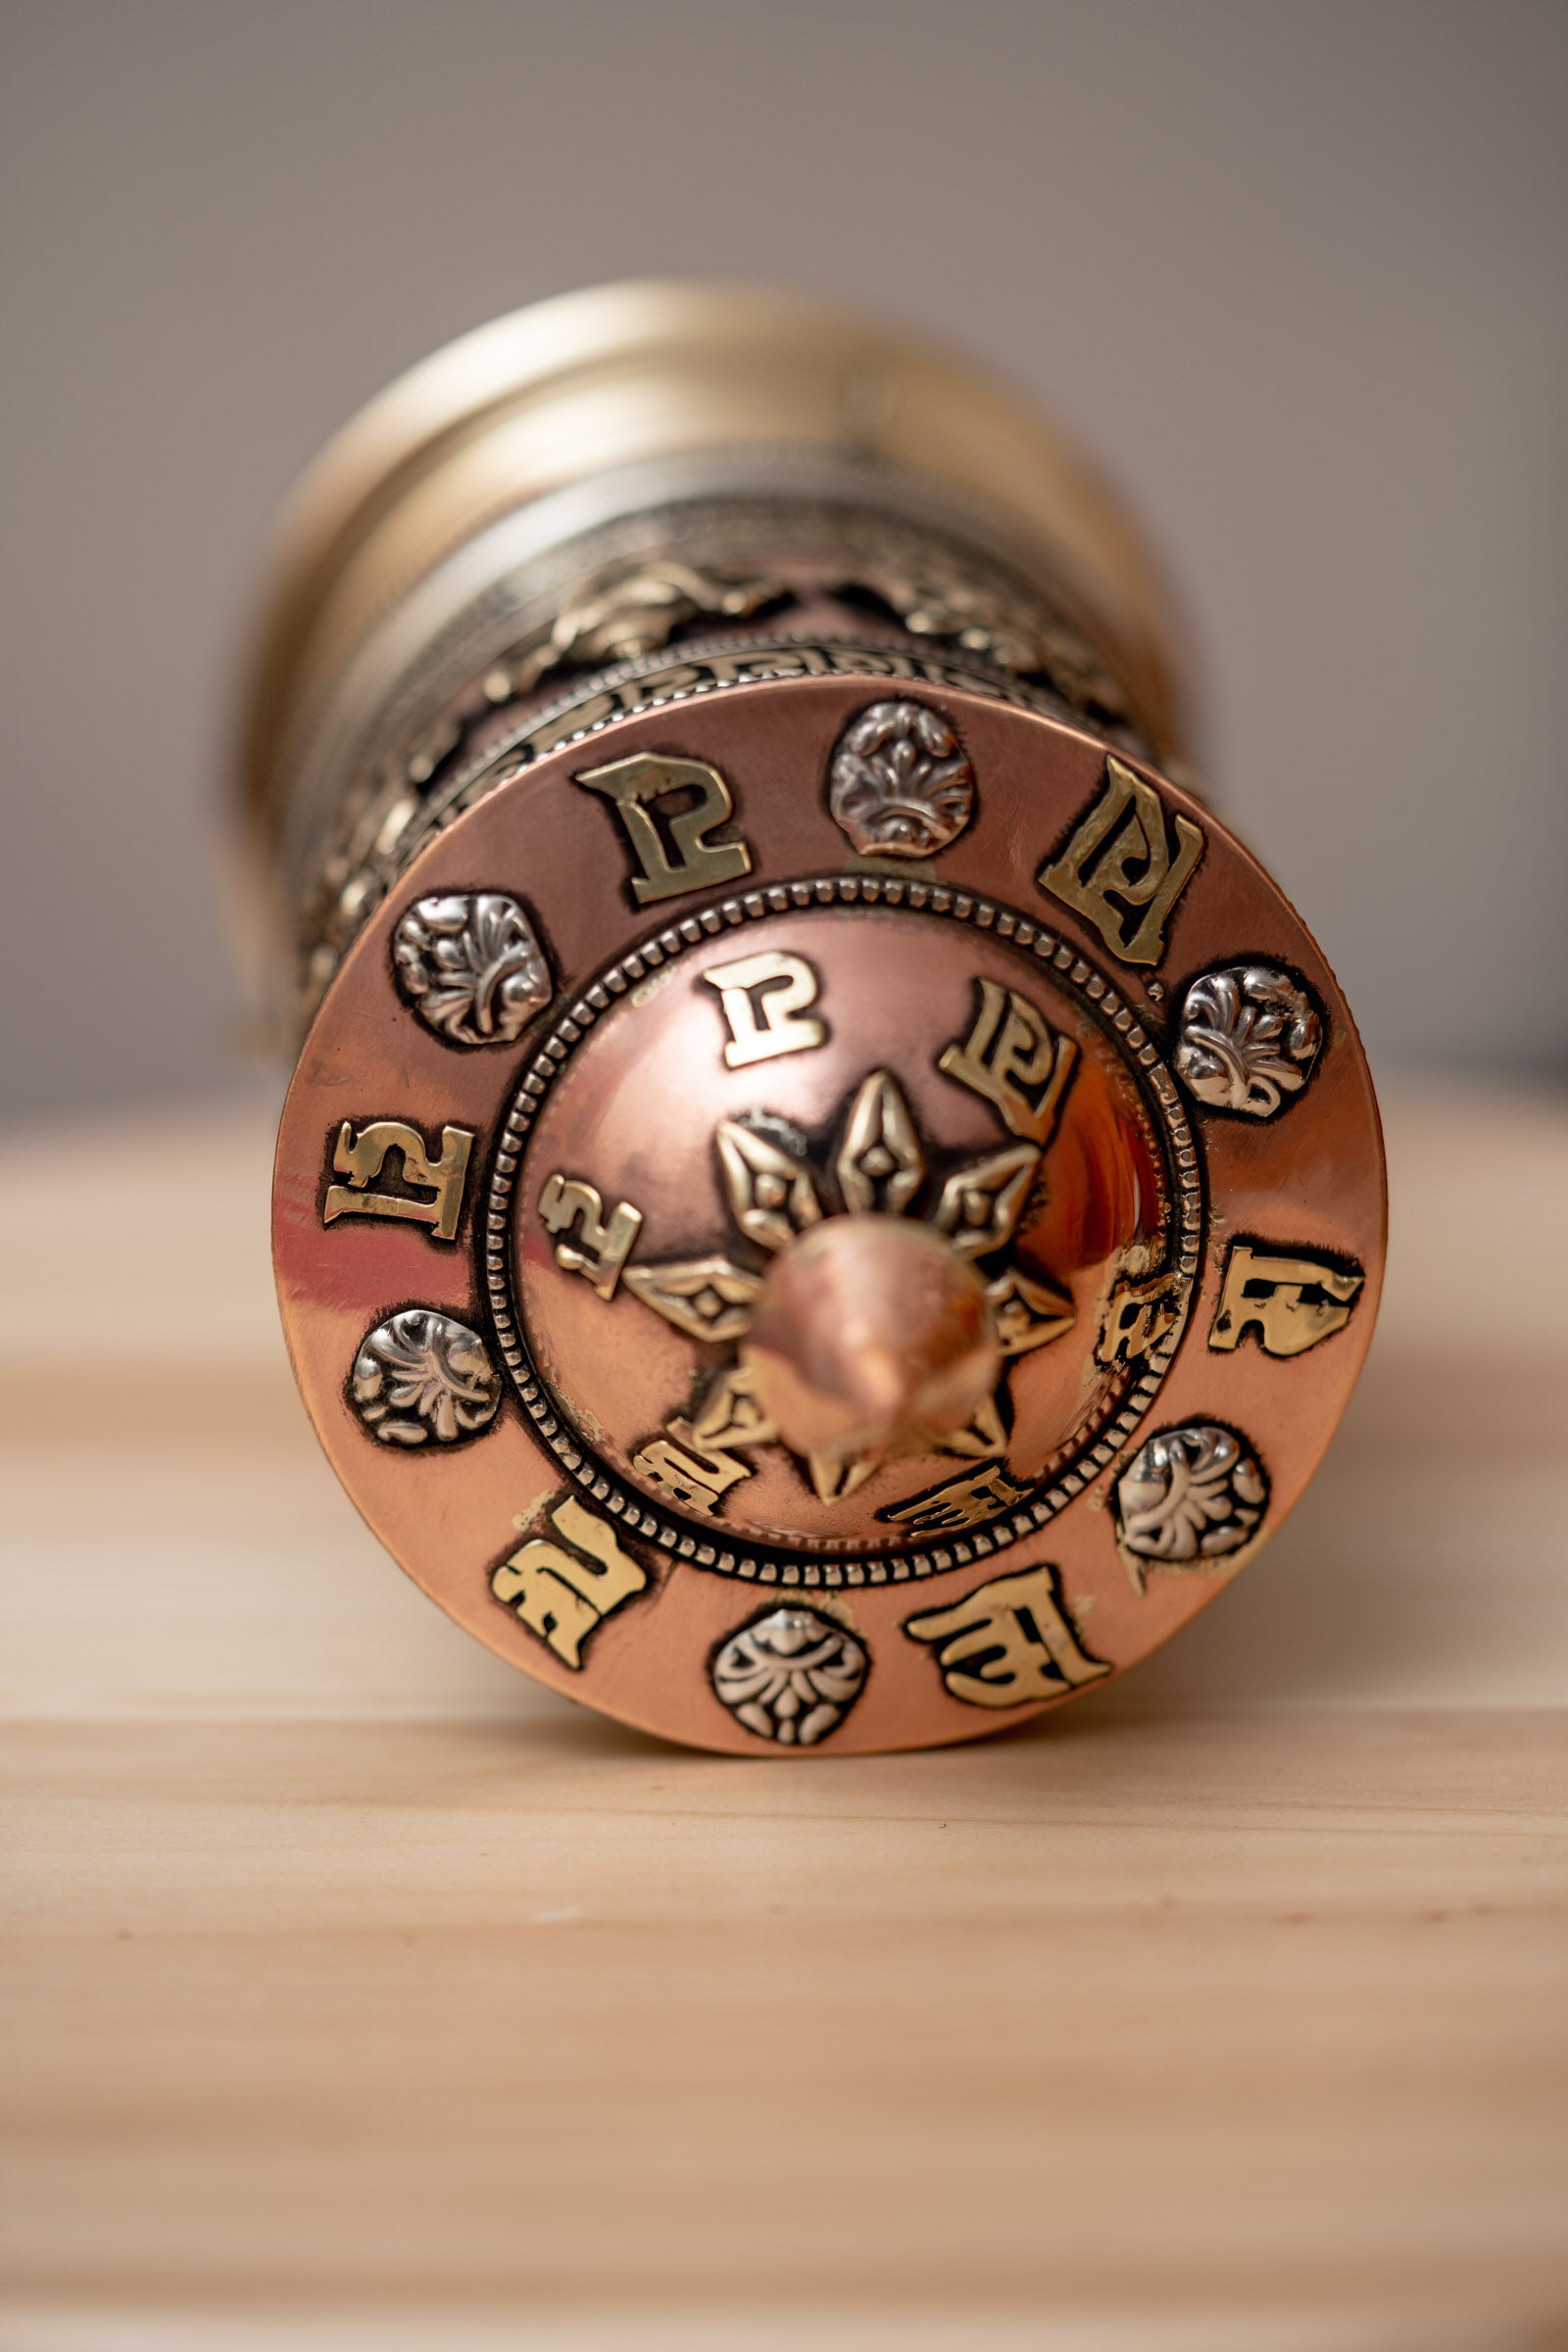  Prayer Wheel for purification and transformation of negative energies.